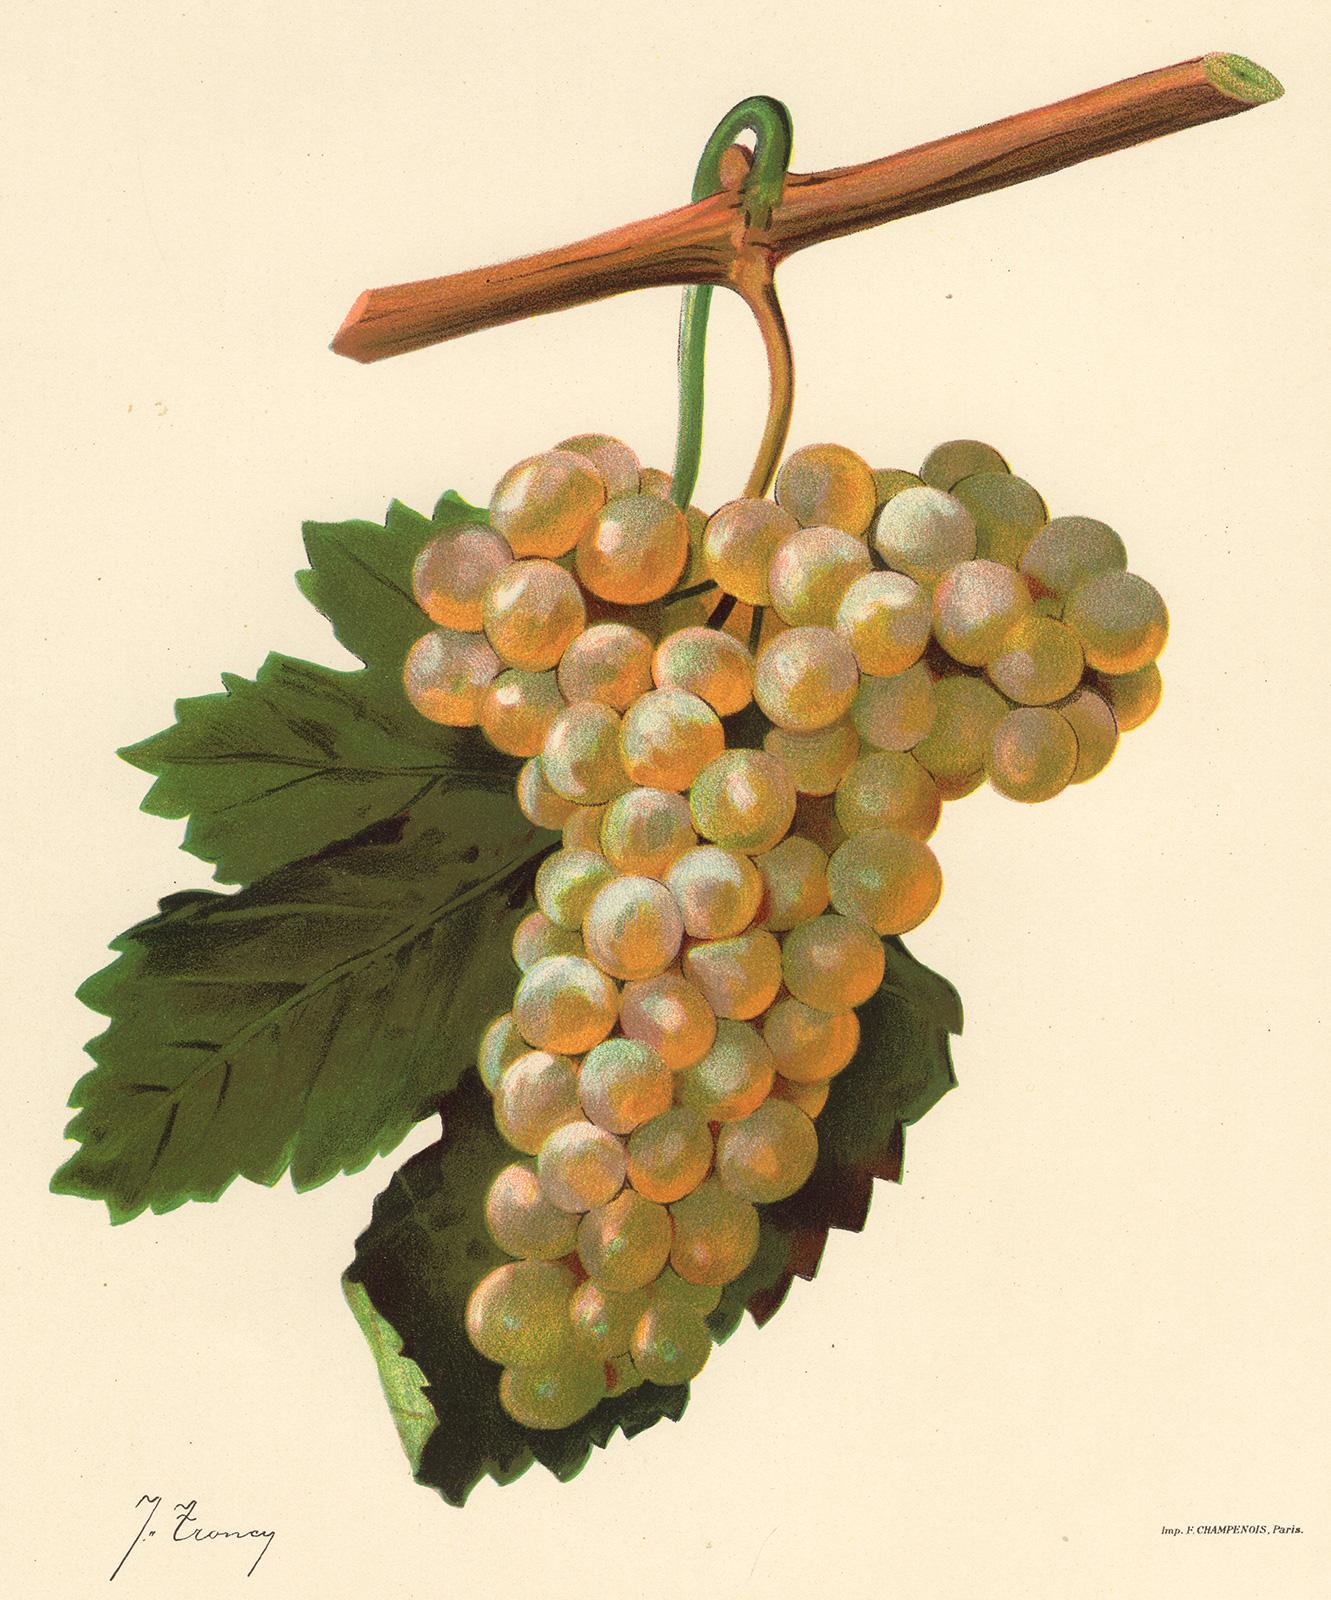 Victor Vermorel Print - Verdat Blanc grape - from Ampelography by Vermorel - Lithograph - Early 20th c.